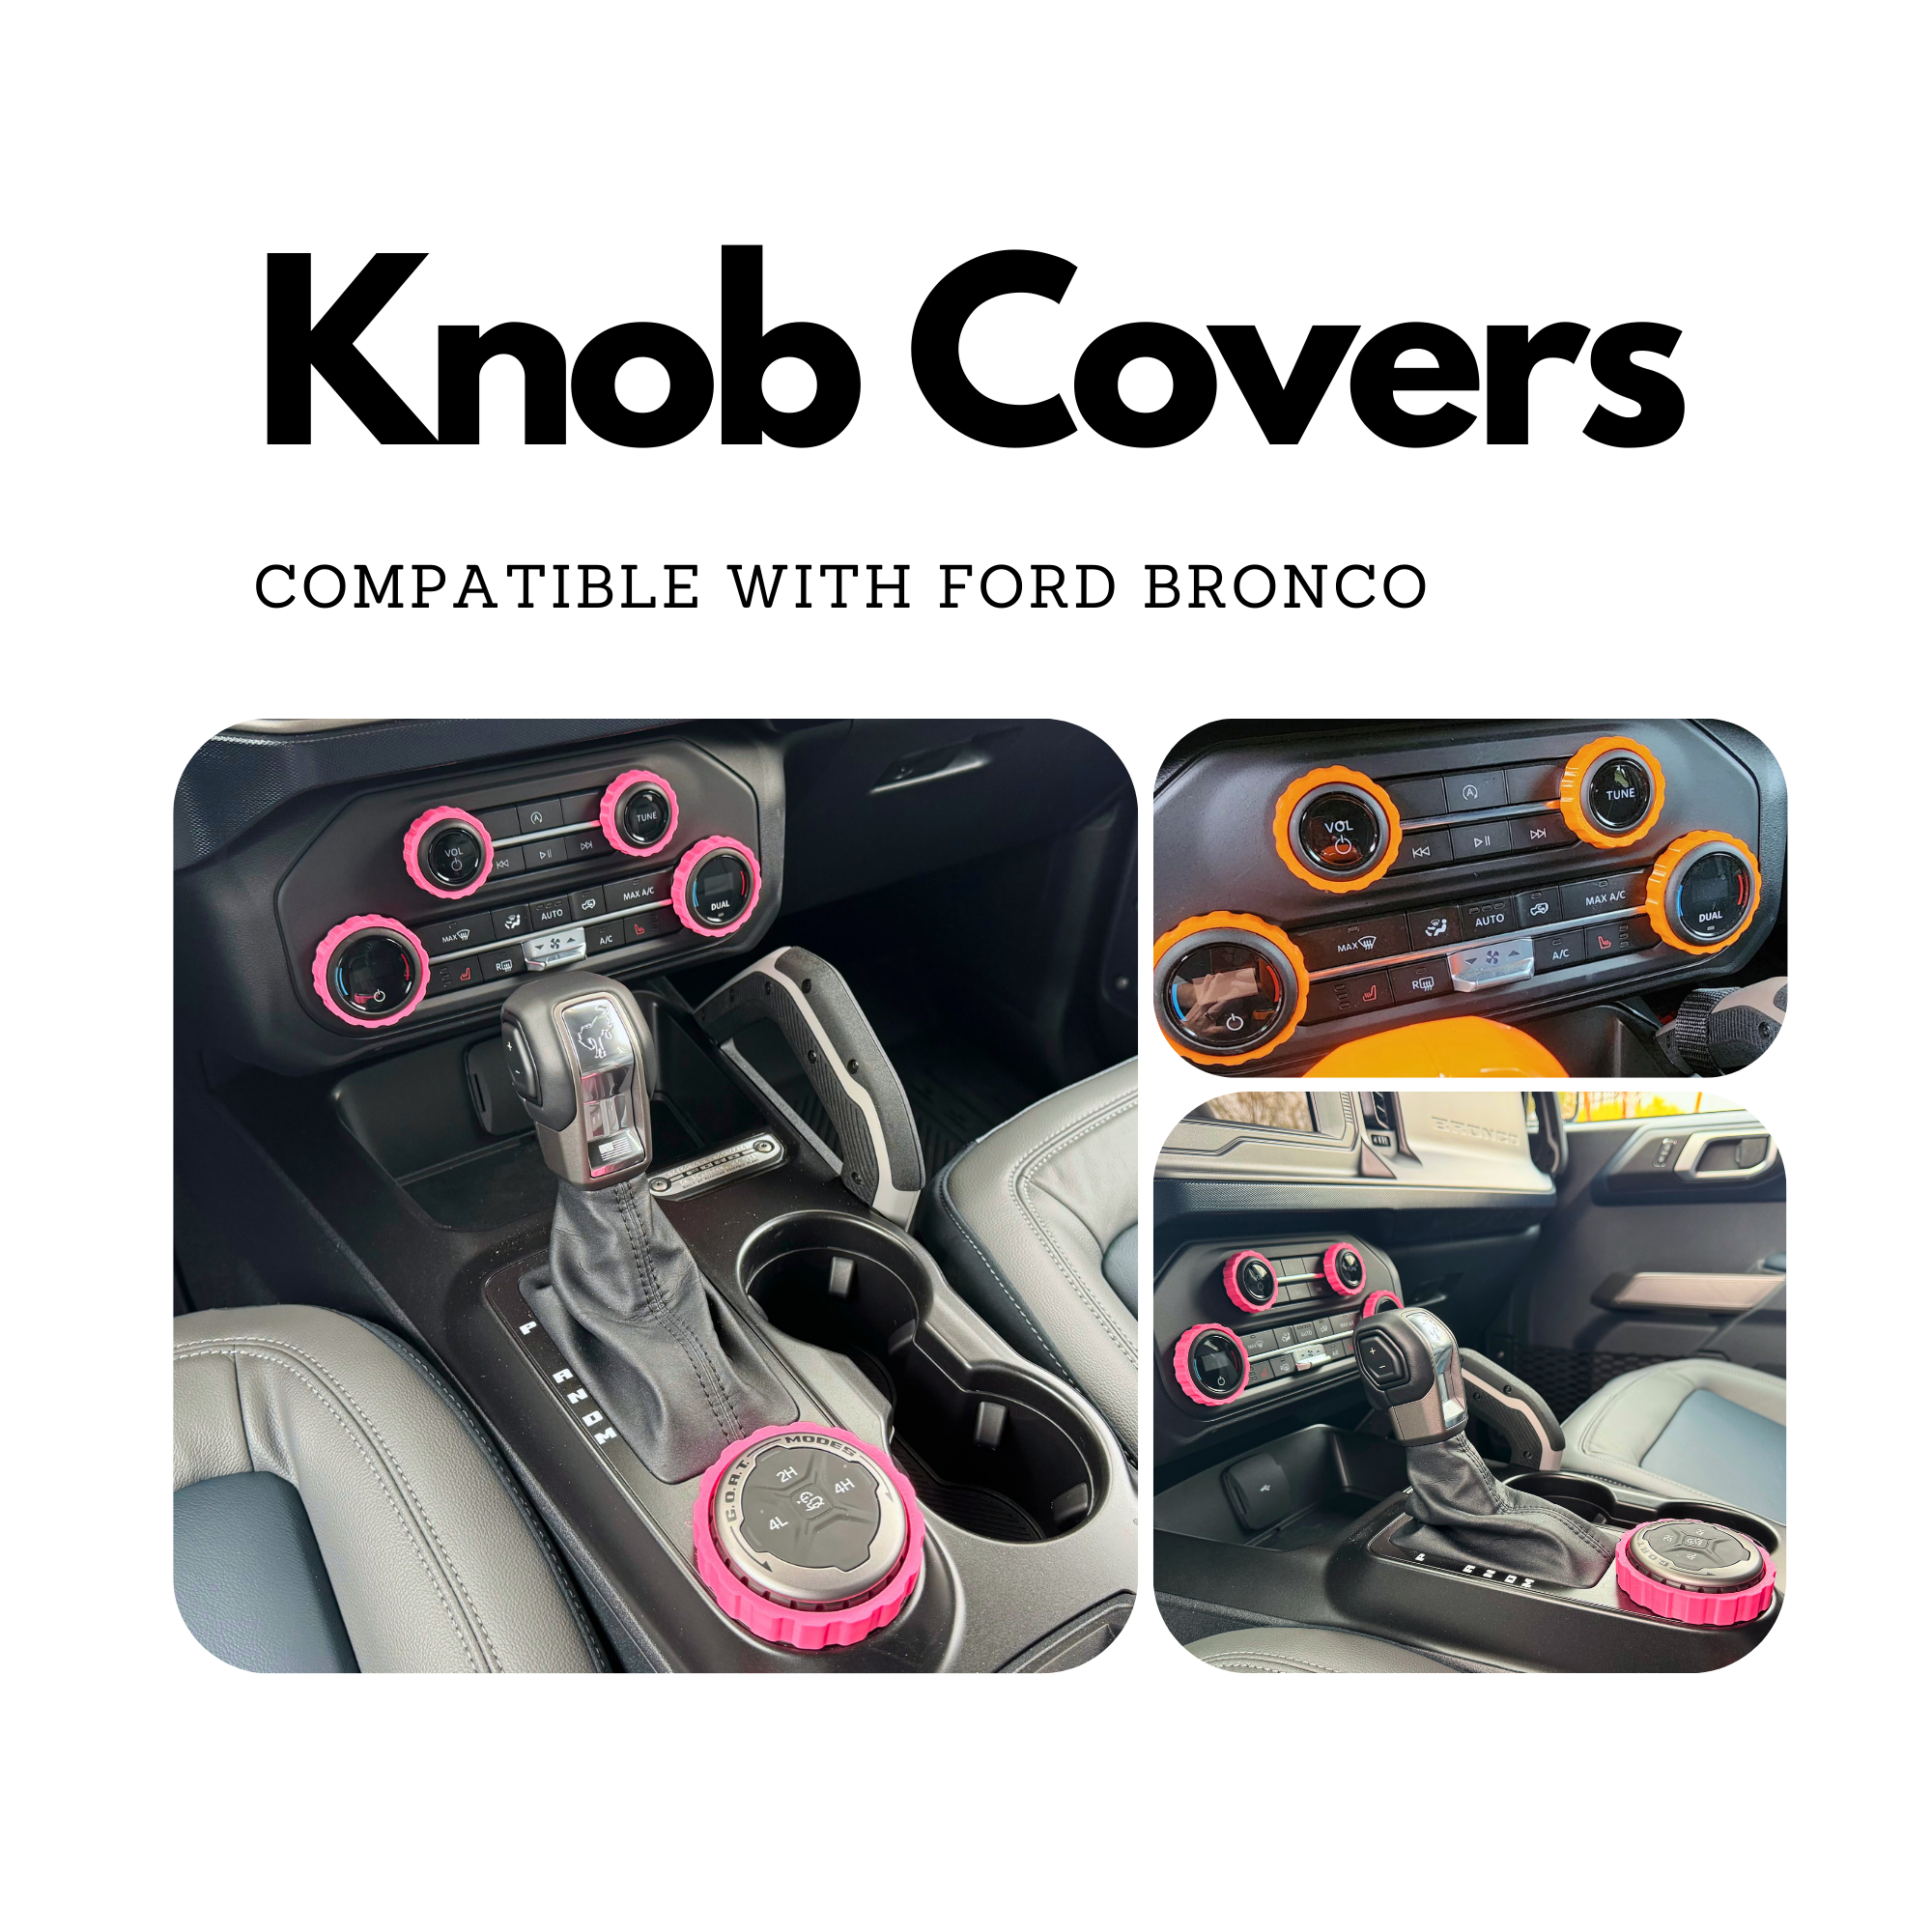 Knobs Set for Ford Bronco Includes AC Radio GOAT Lamp Knobs - Fits Full Size Bronco 2021, 22, 23 ford bronco interior accessories